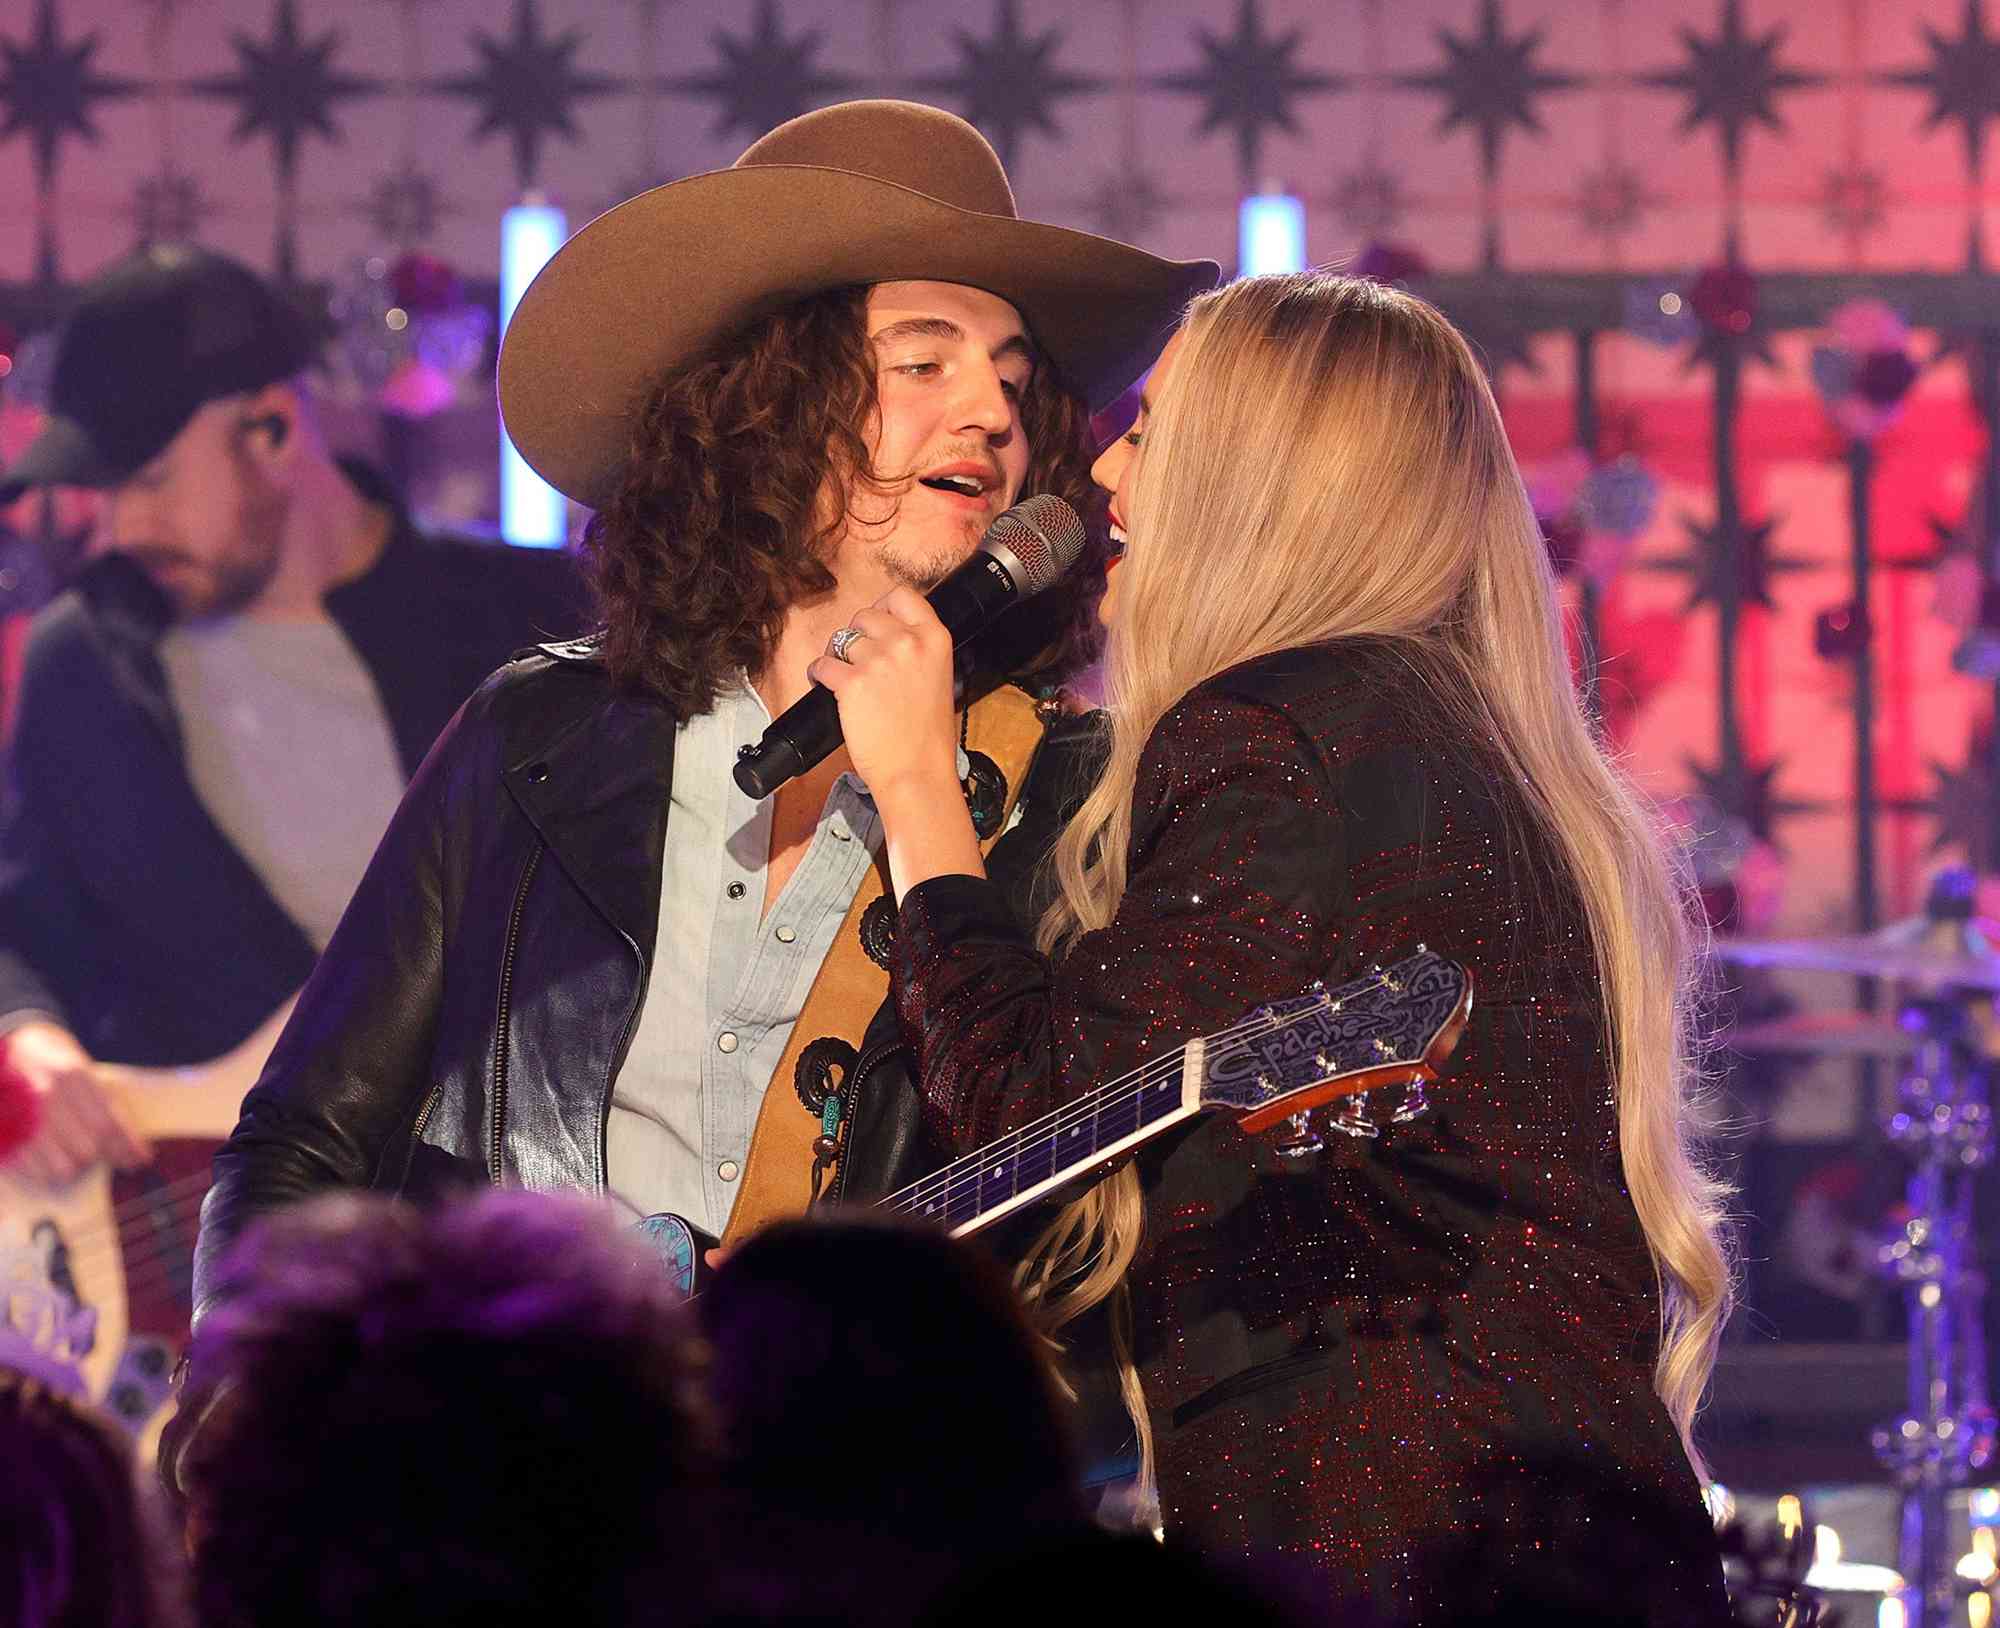 Cade Foehner and Gabby Barrett perform during the New Year's Eve Live Nashville's Big Bash at Casa Rosa in Nashville, Tennessee